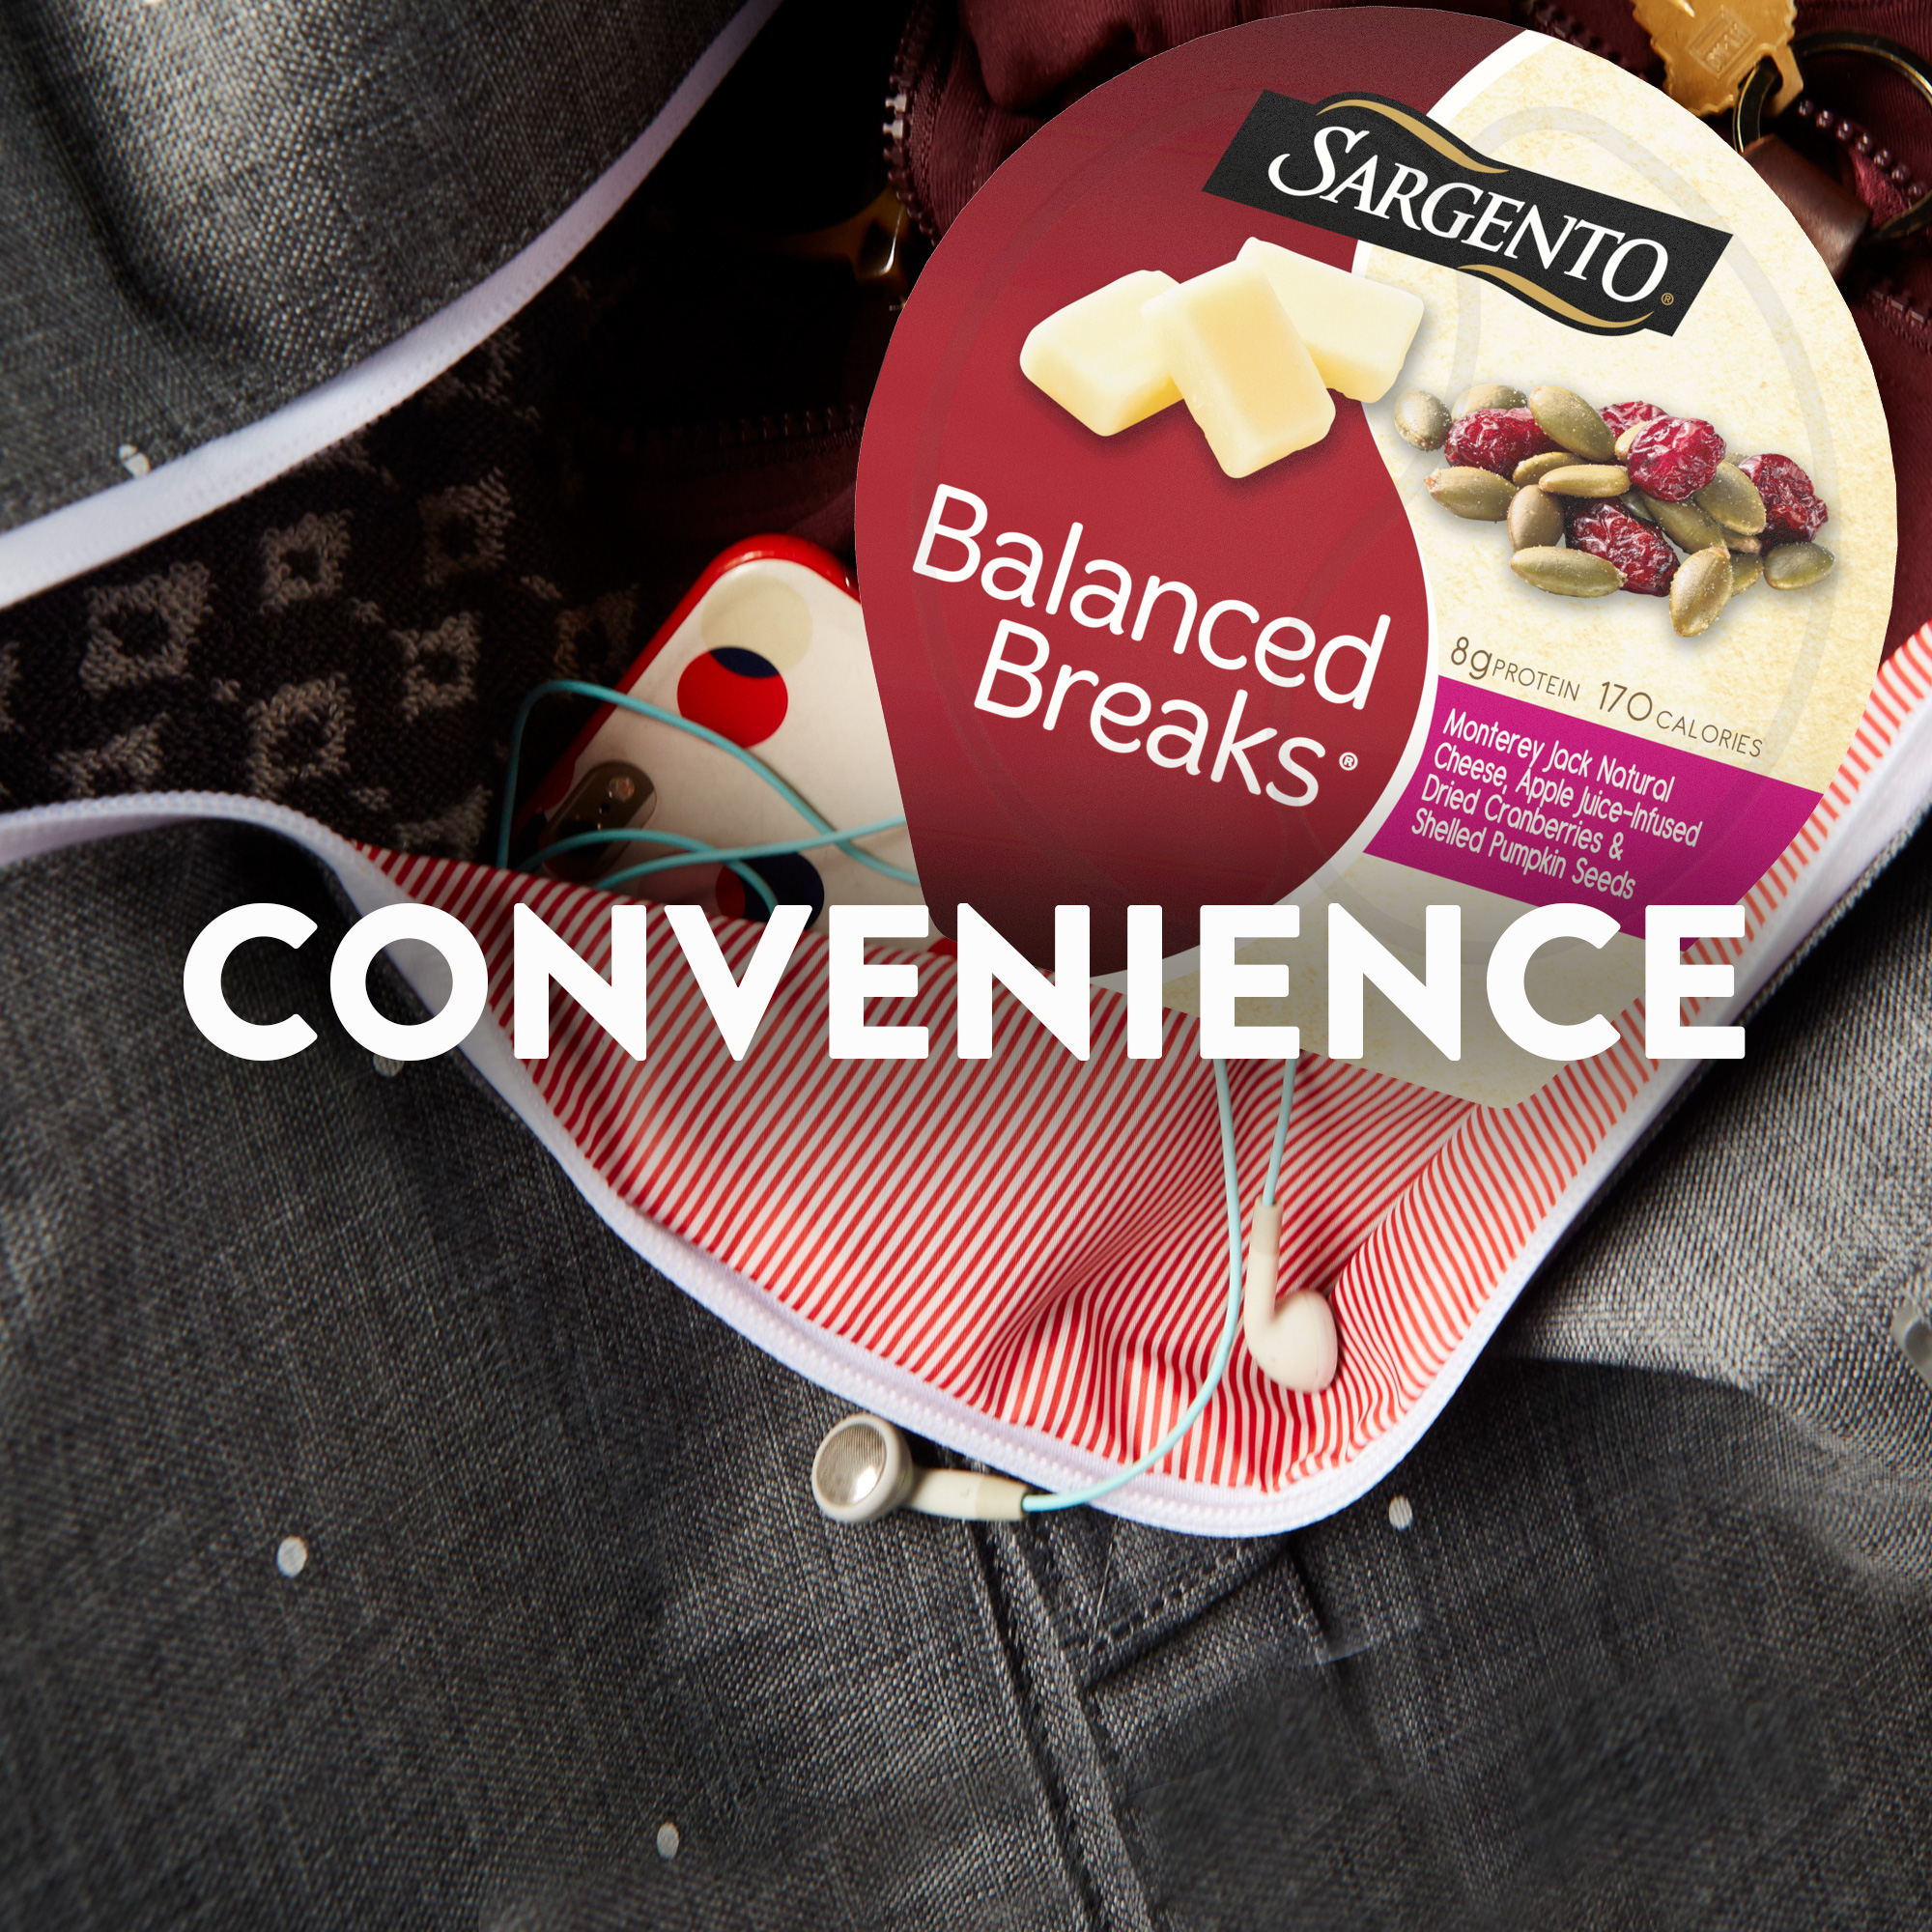 Sargento® Balanced Breaks®, Monterey Jack Natural Cheese, Apple Juice-Infused Dried Cranberries and Shelled Pumpkin Seeds